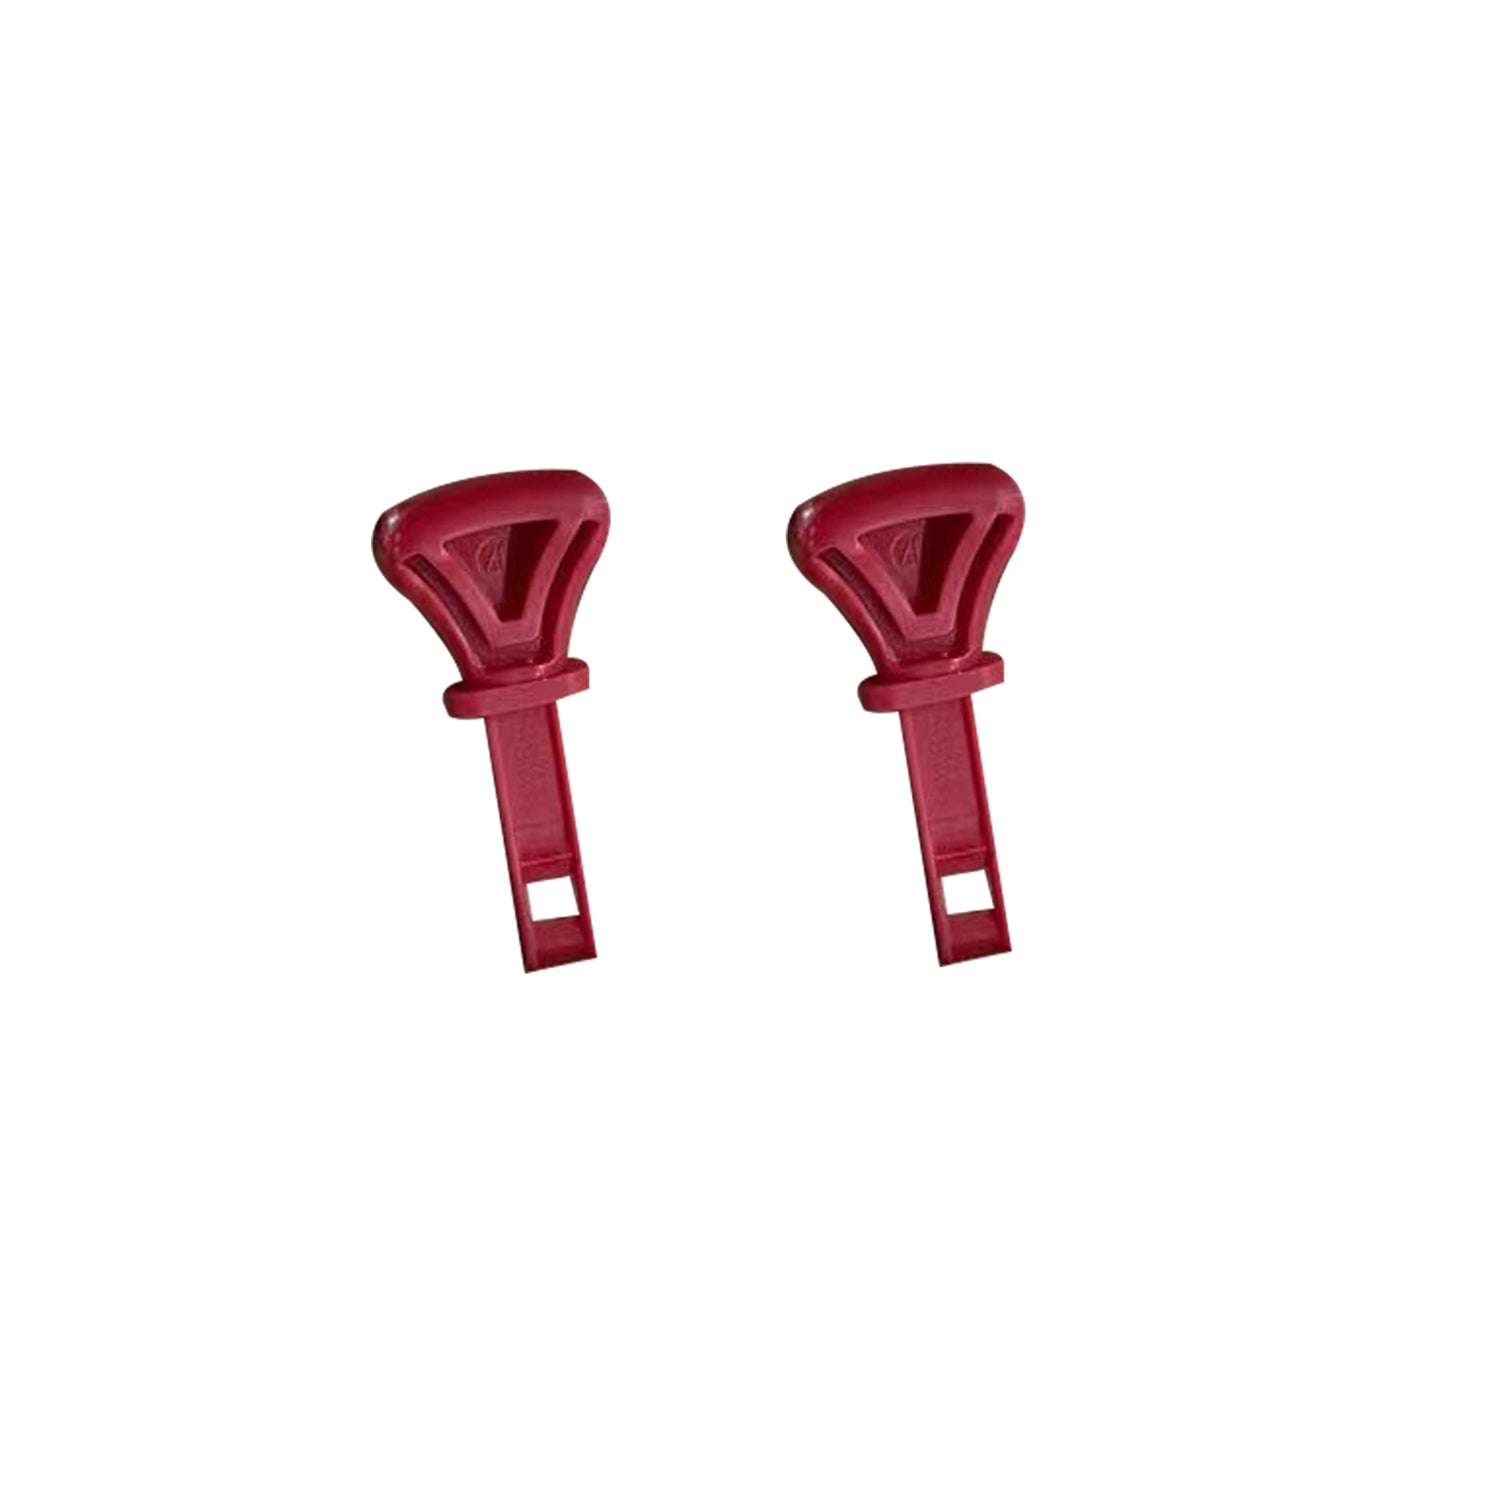 Lawn Mower/Snow Blower Parts -Safety Key 2-Pack, Stock #:9440960102